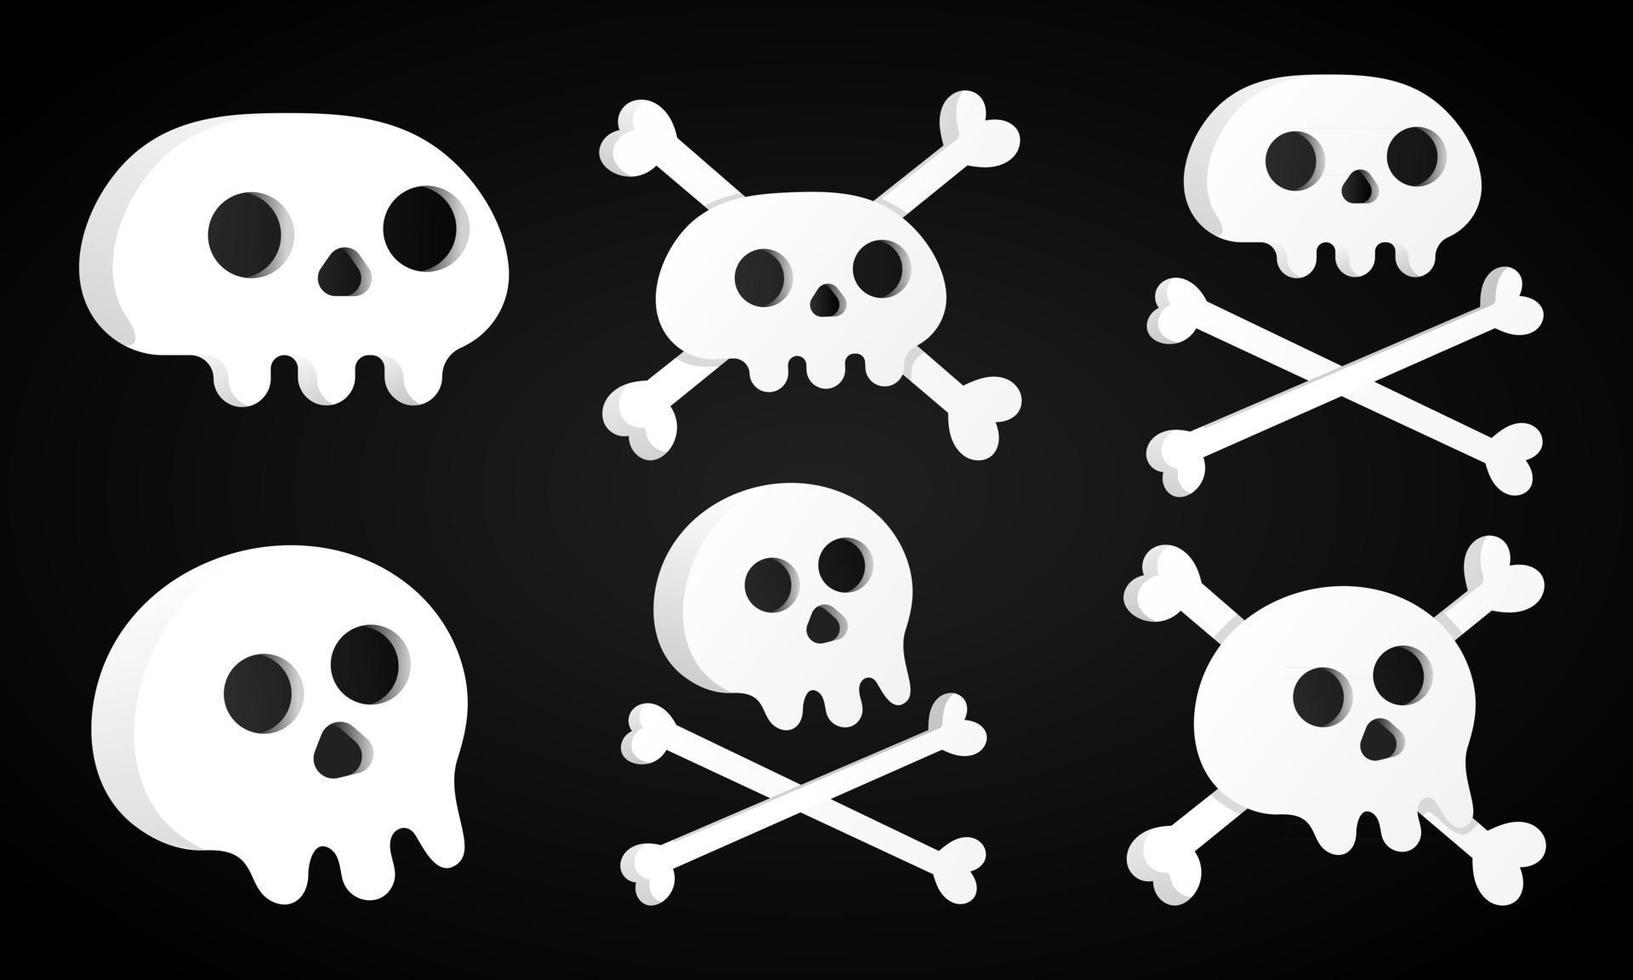 6 Simple flat style design sculls with crossed bones set vector